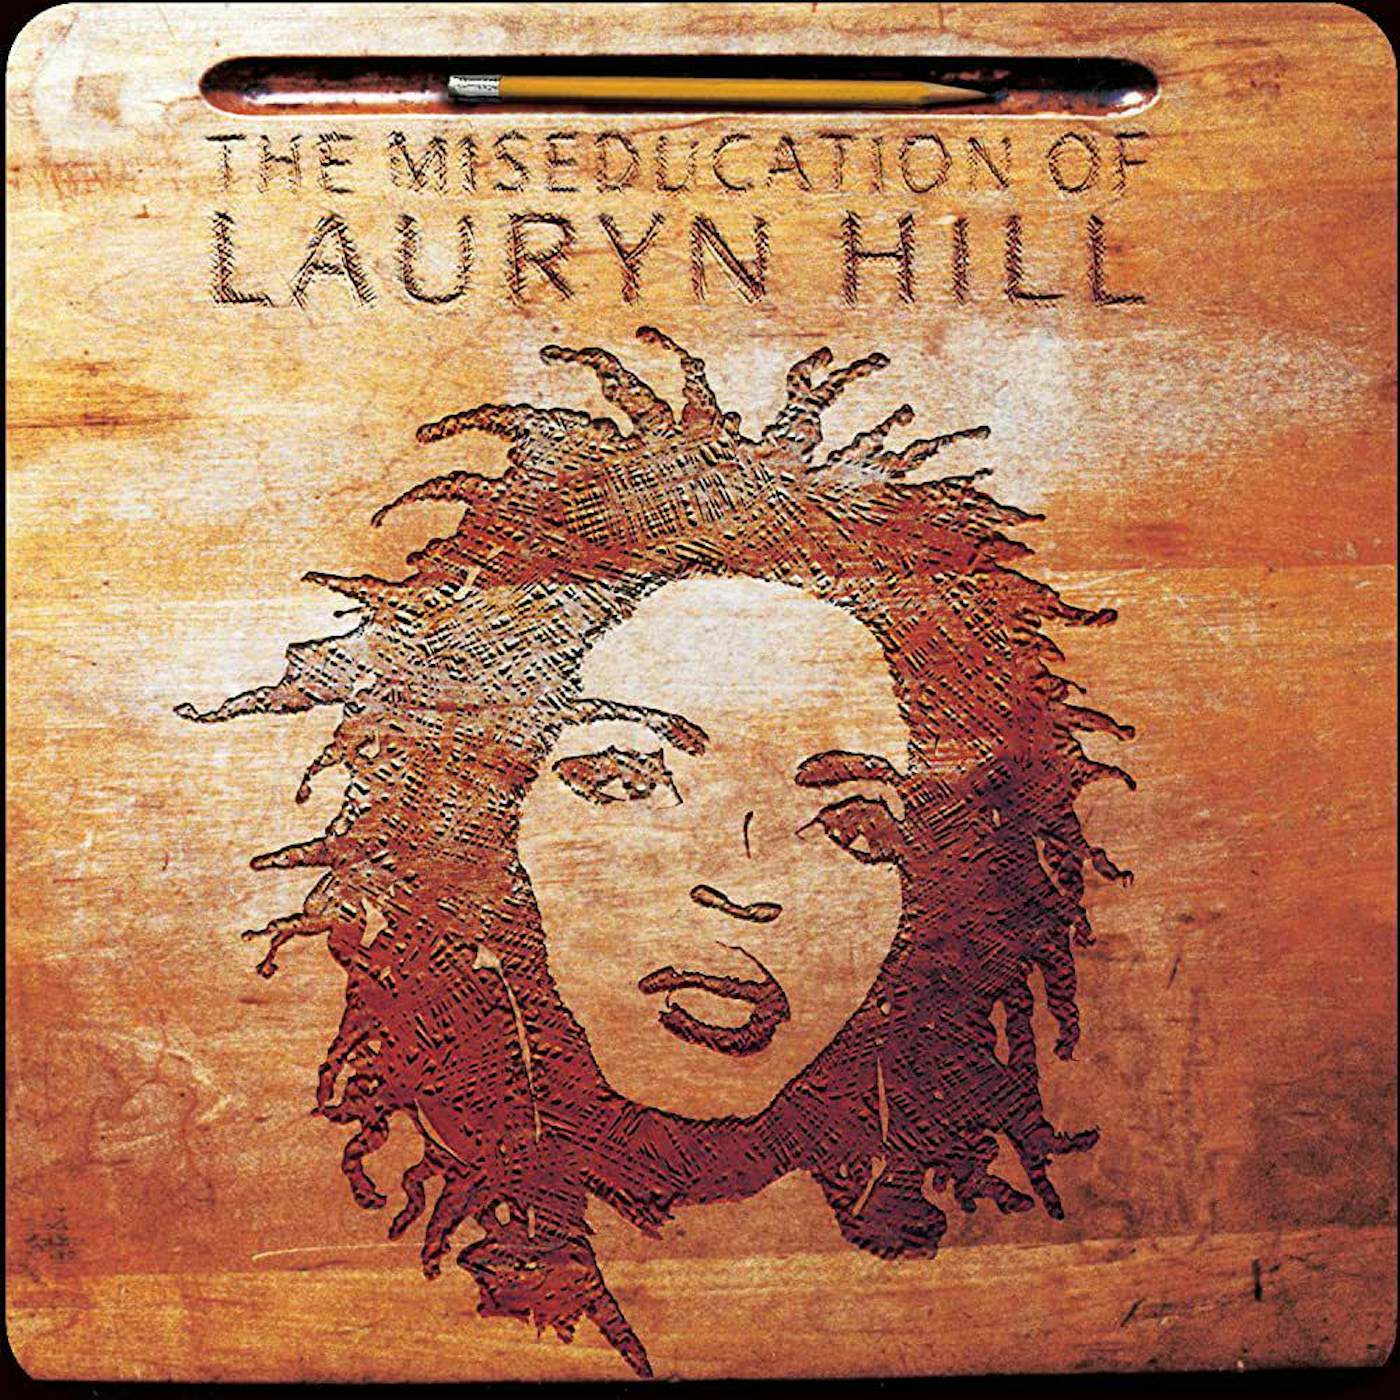 The Miseducation of Lauryn Hill Vinyl Record